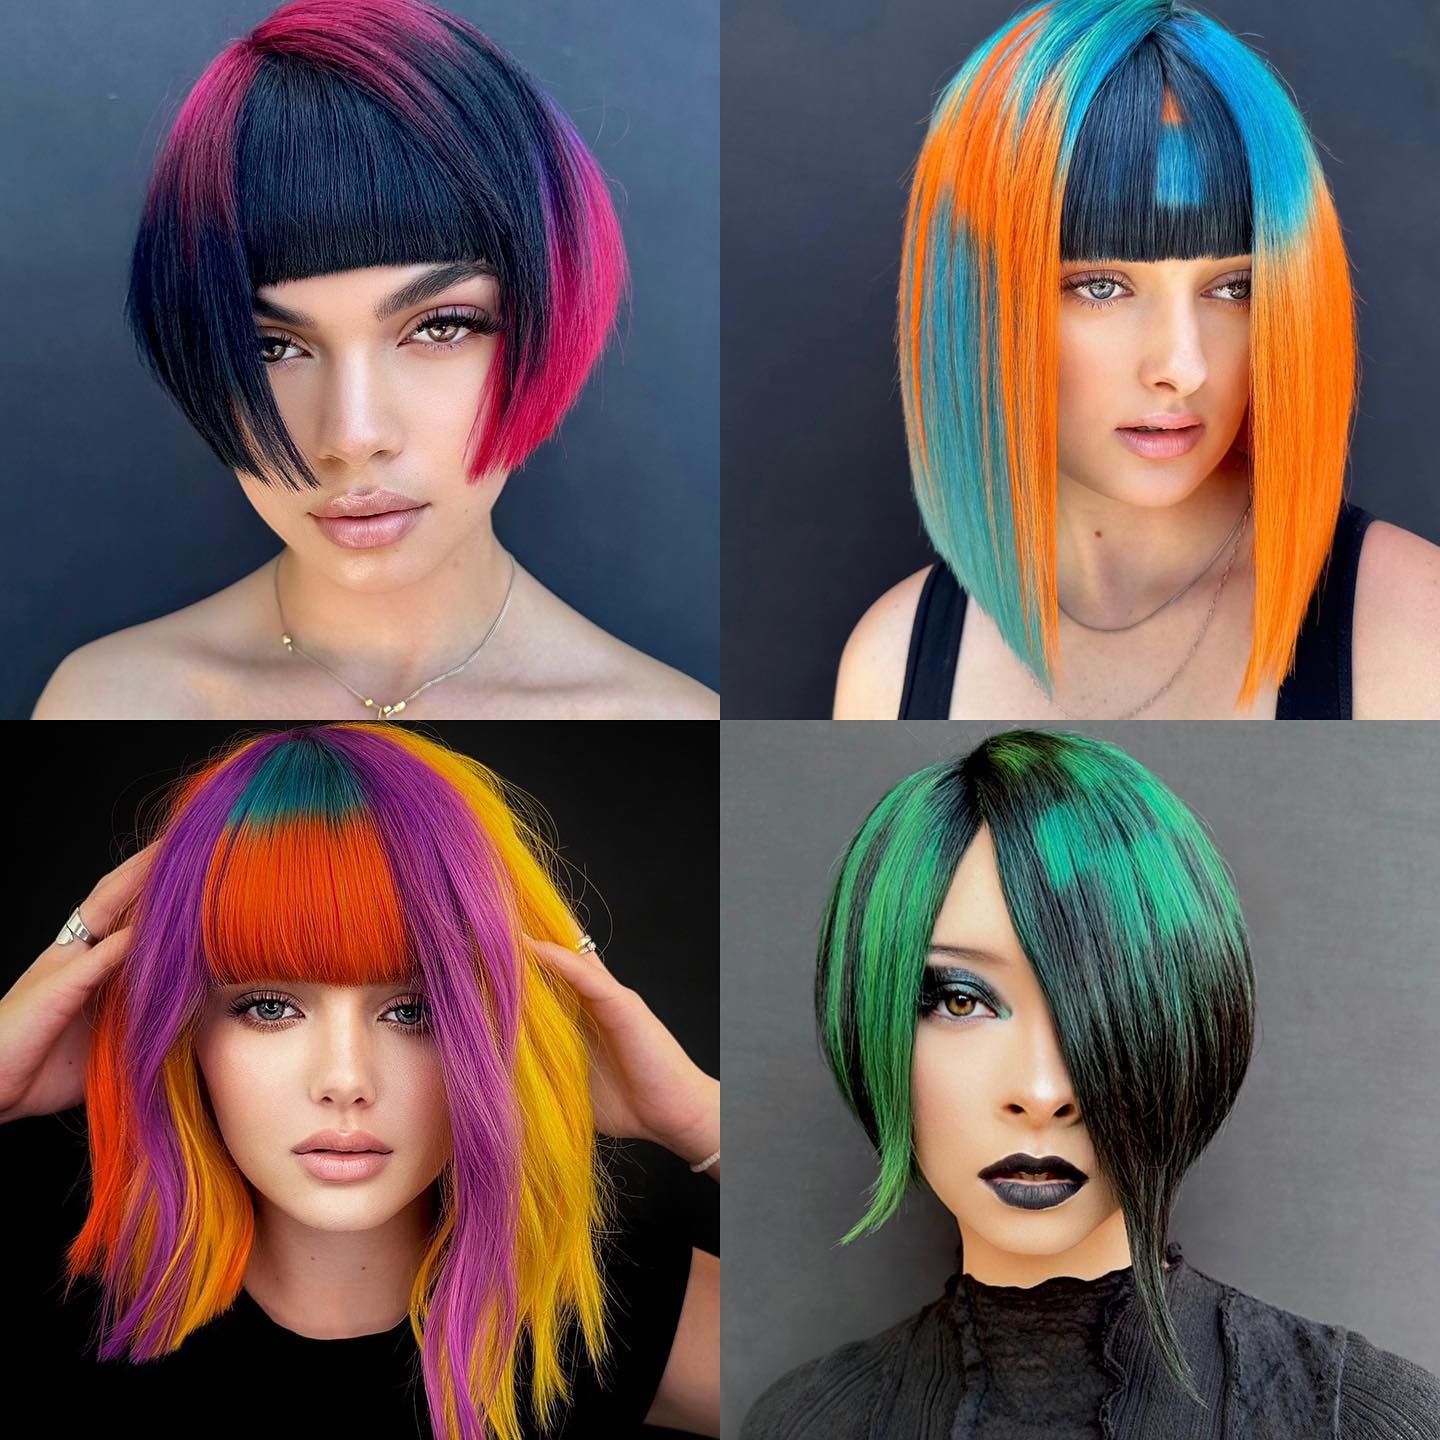 100+ Best Colorful Hair Ideas images 1